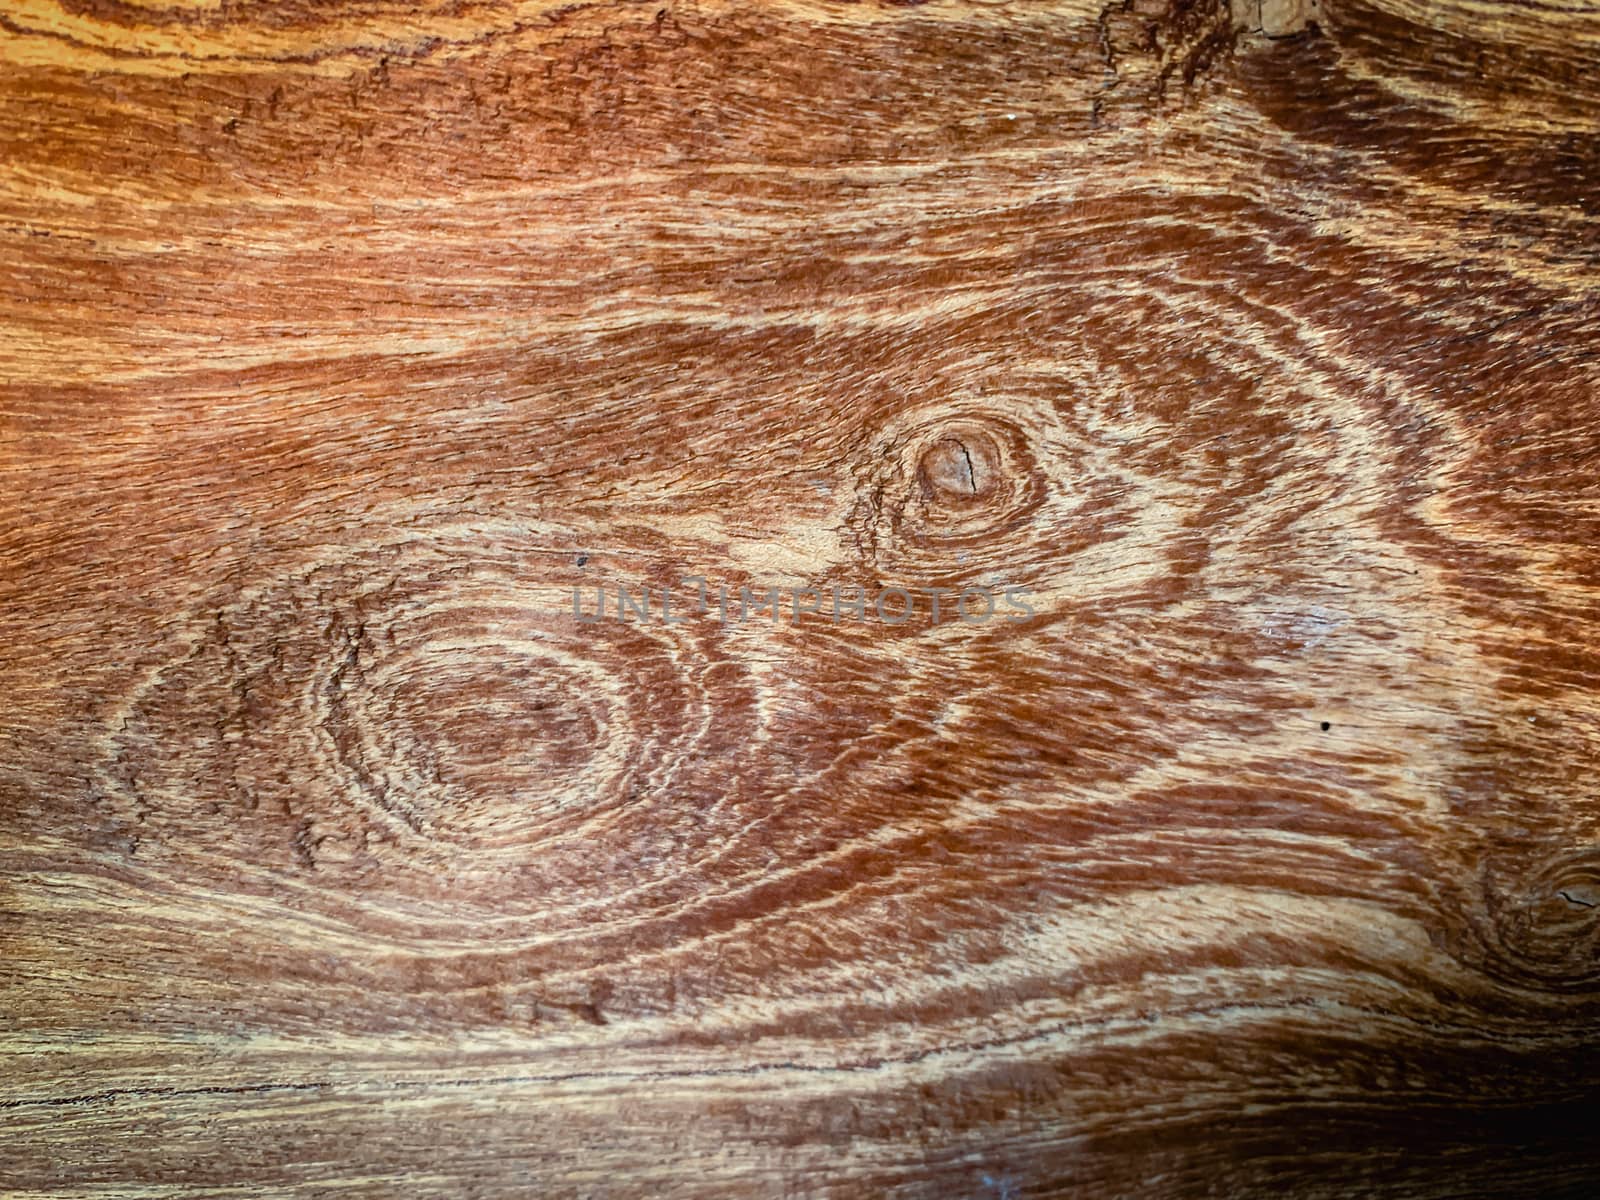 Background texture of old wood